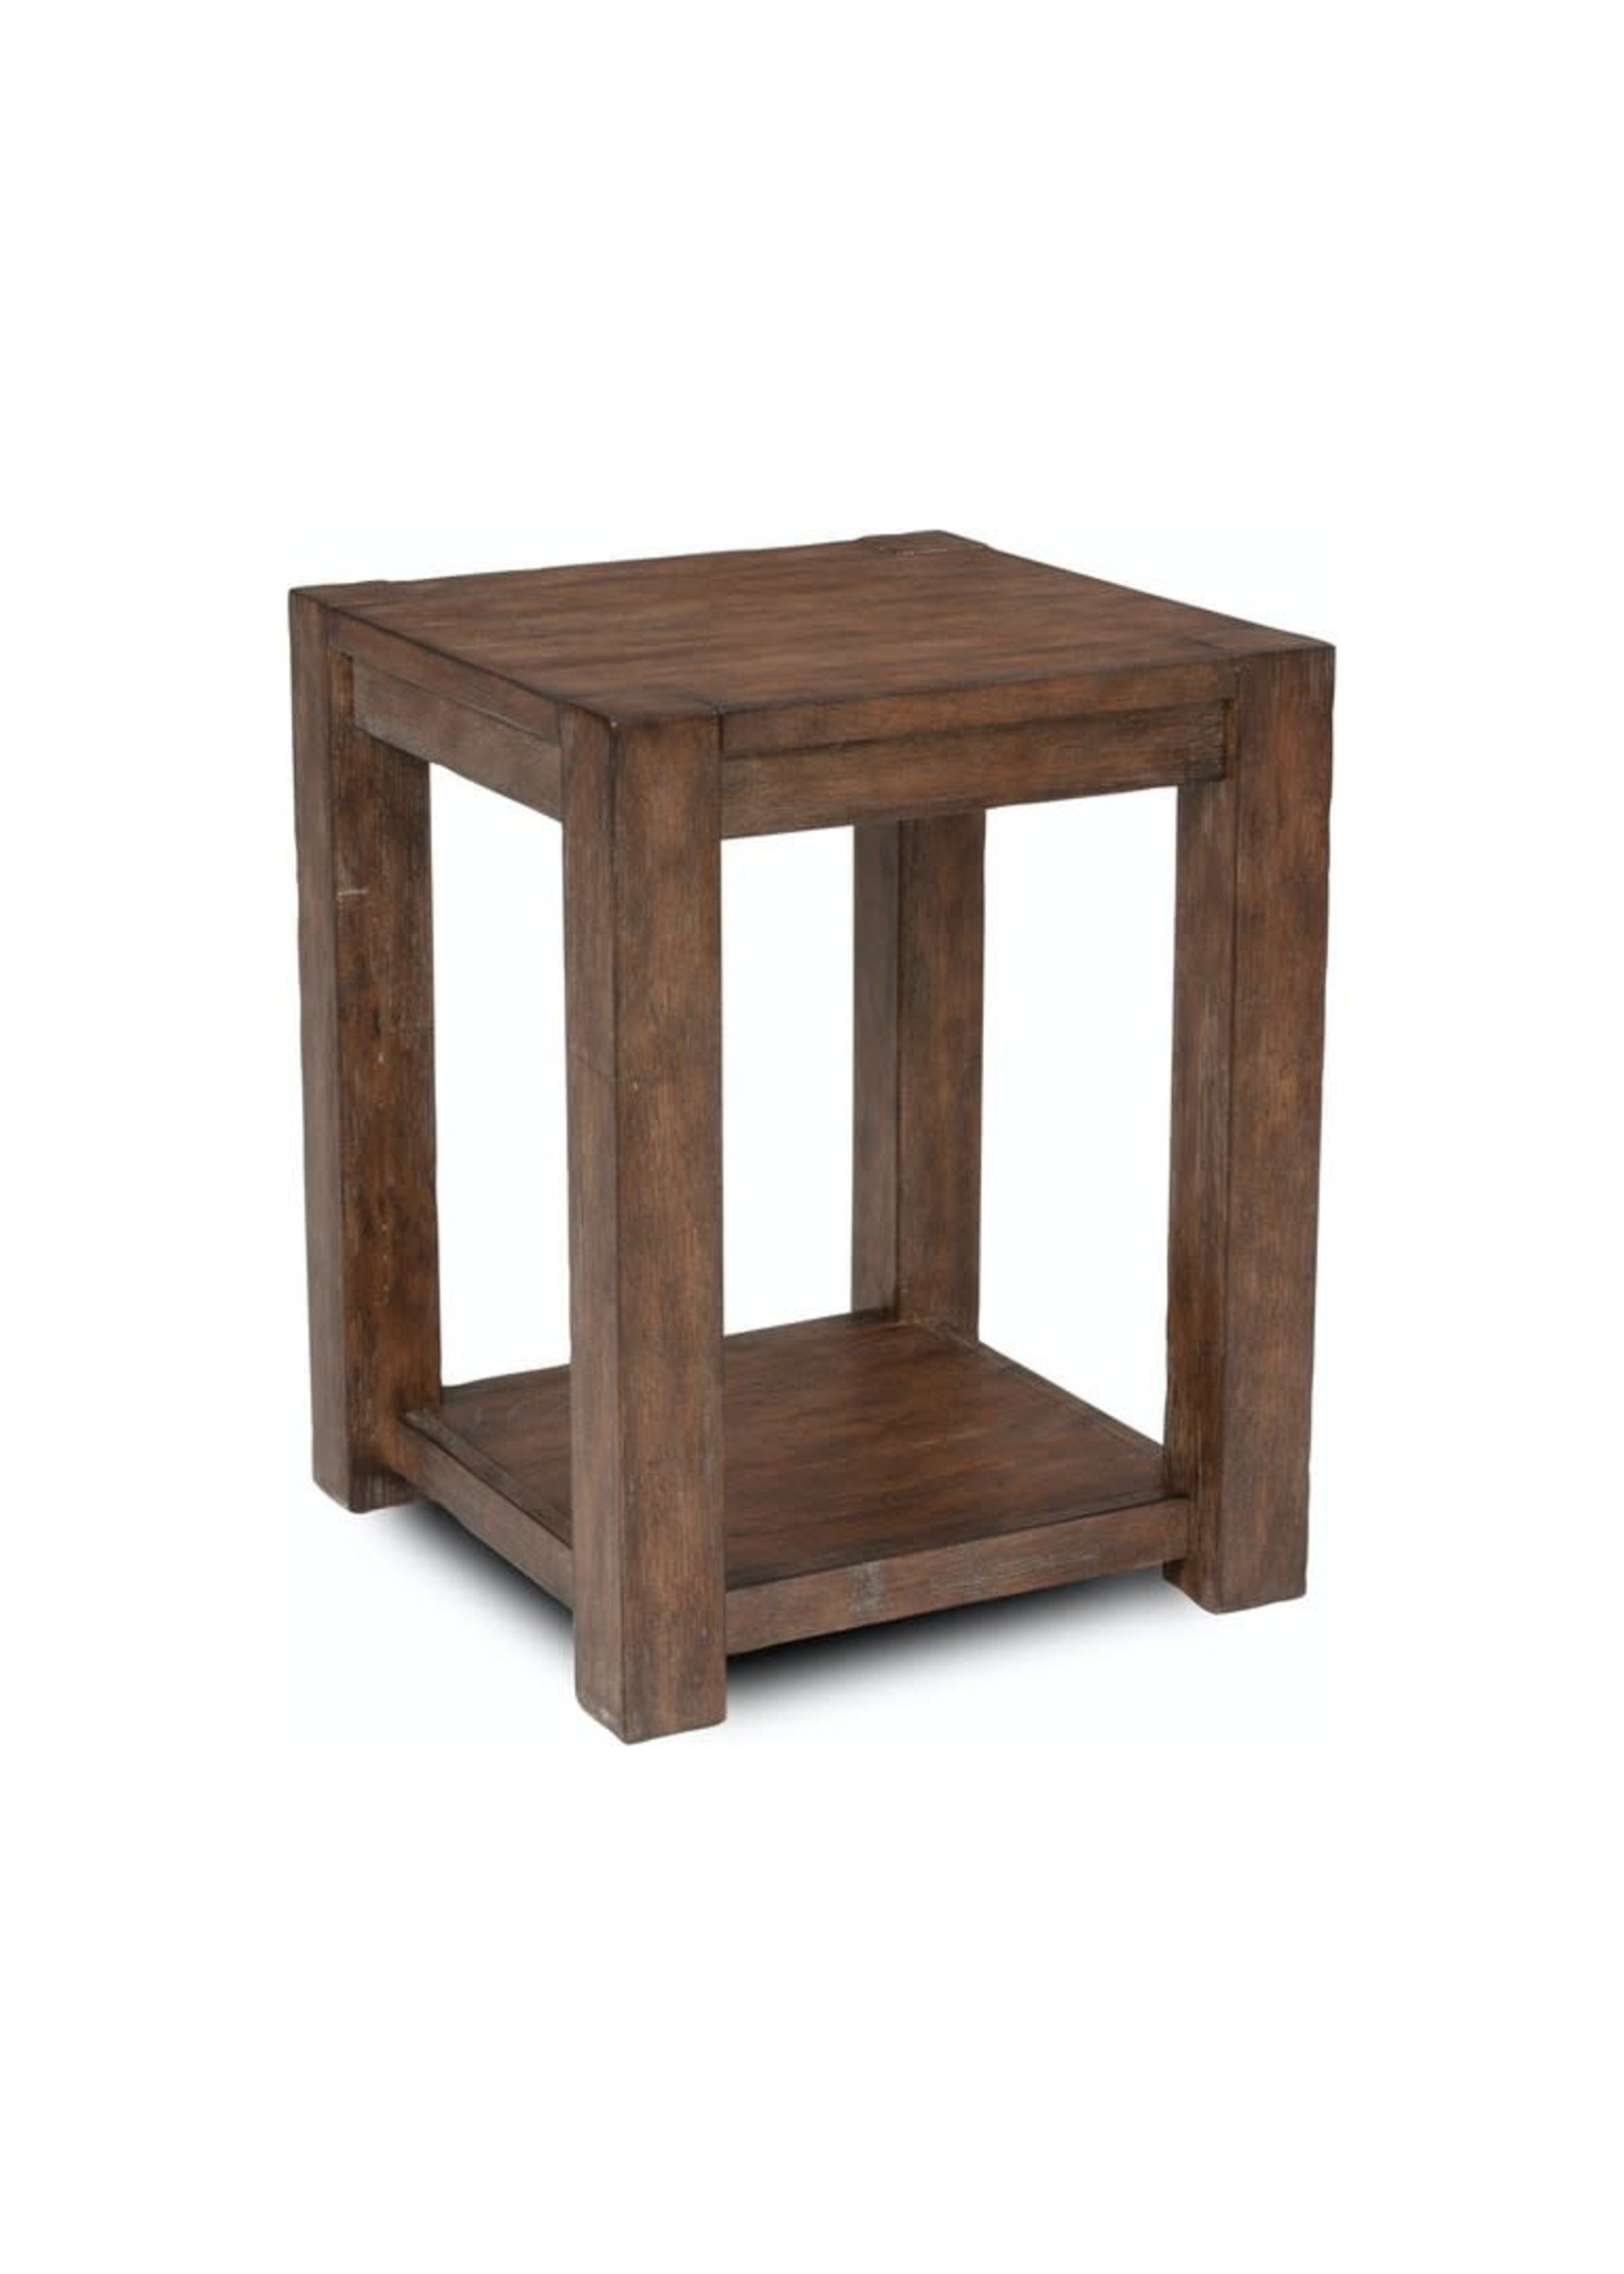 BOULDER CHAIRSIDE TABLE